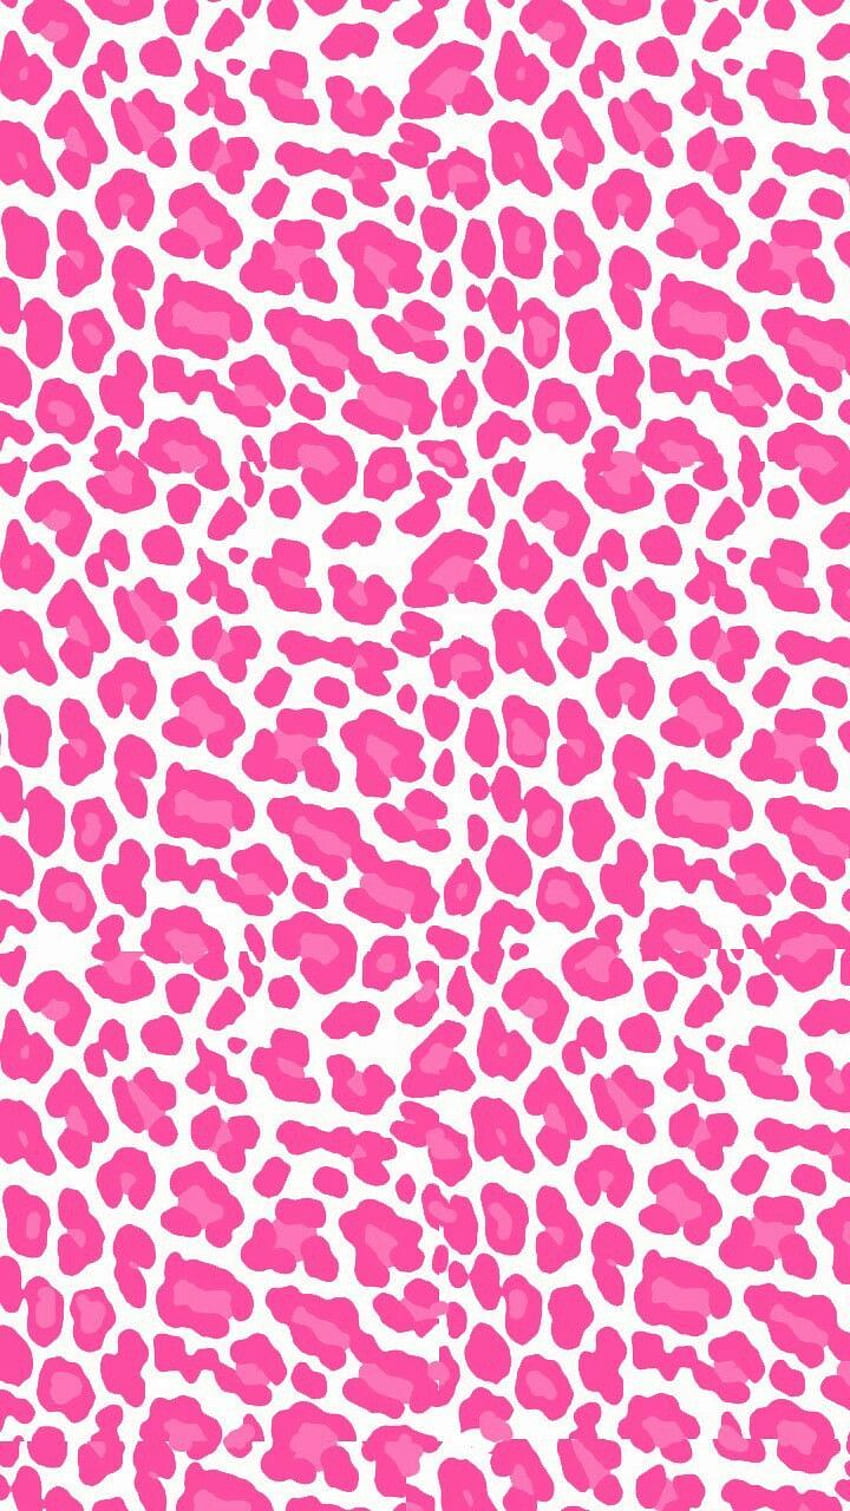 Pin by Victoria on wallpapers in 2022  Cheetah print wallpaper Cheetah  print background P  Preppy wallpaper Pink wallpaper backgrounds Pink cheetah  wallpaper